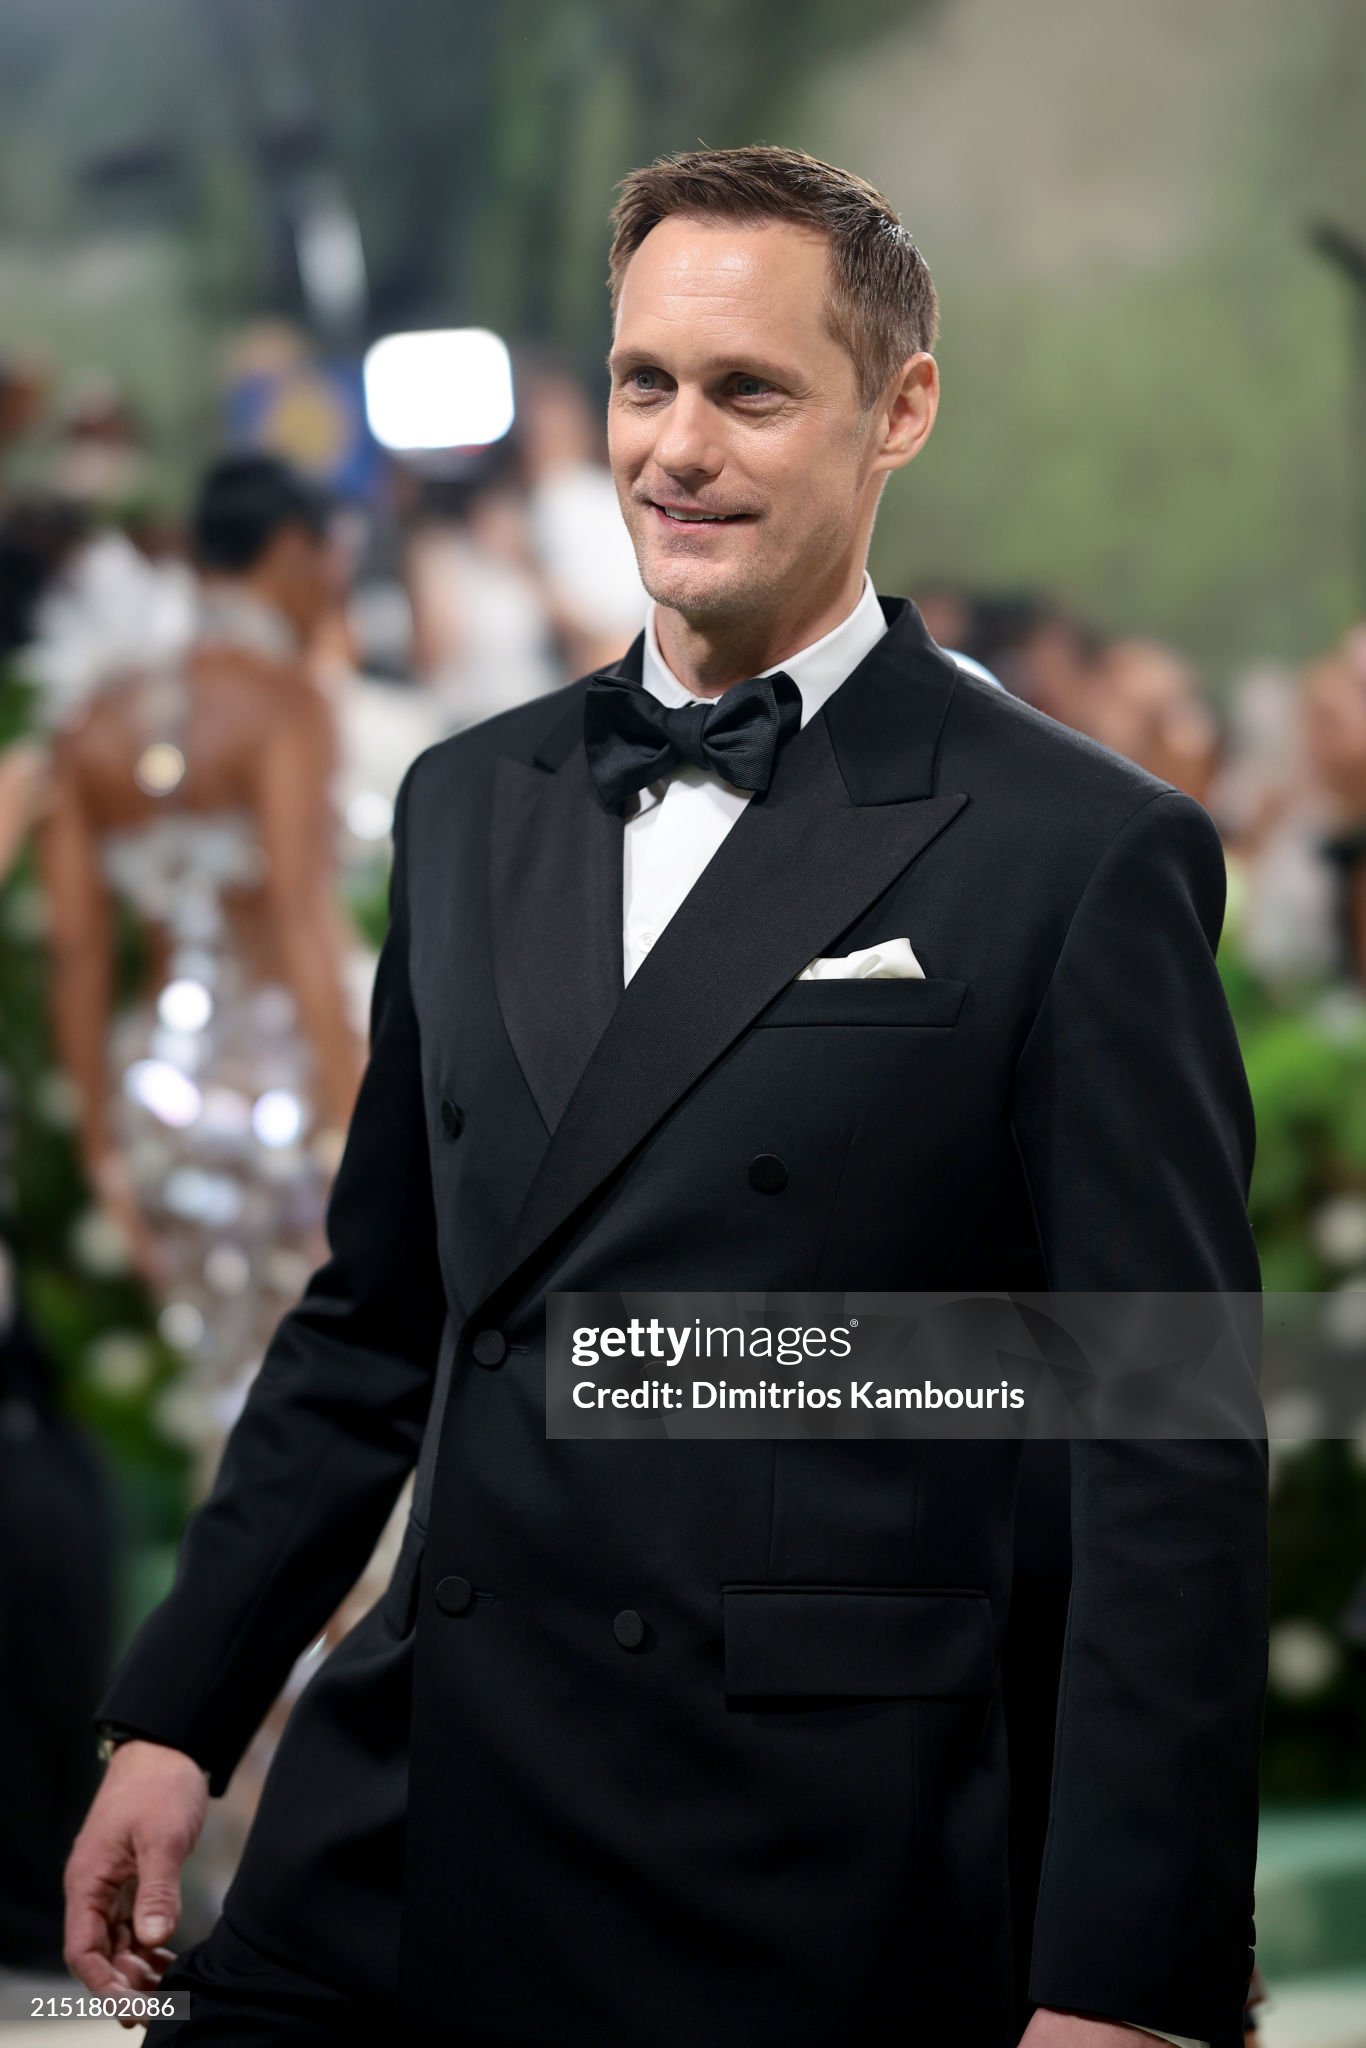 gettyimages-2151802086-2048x2048.jpg